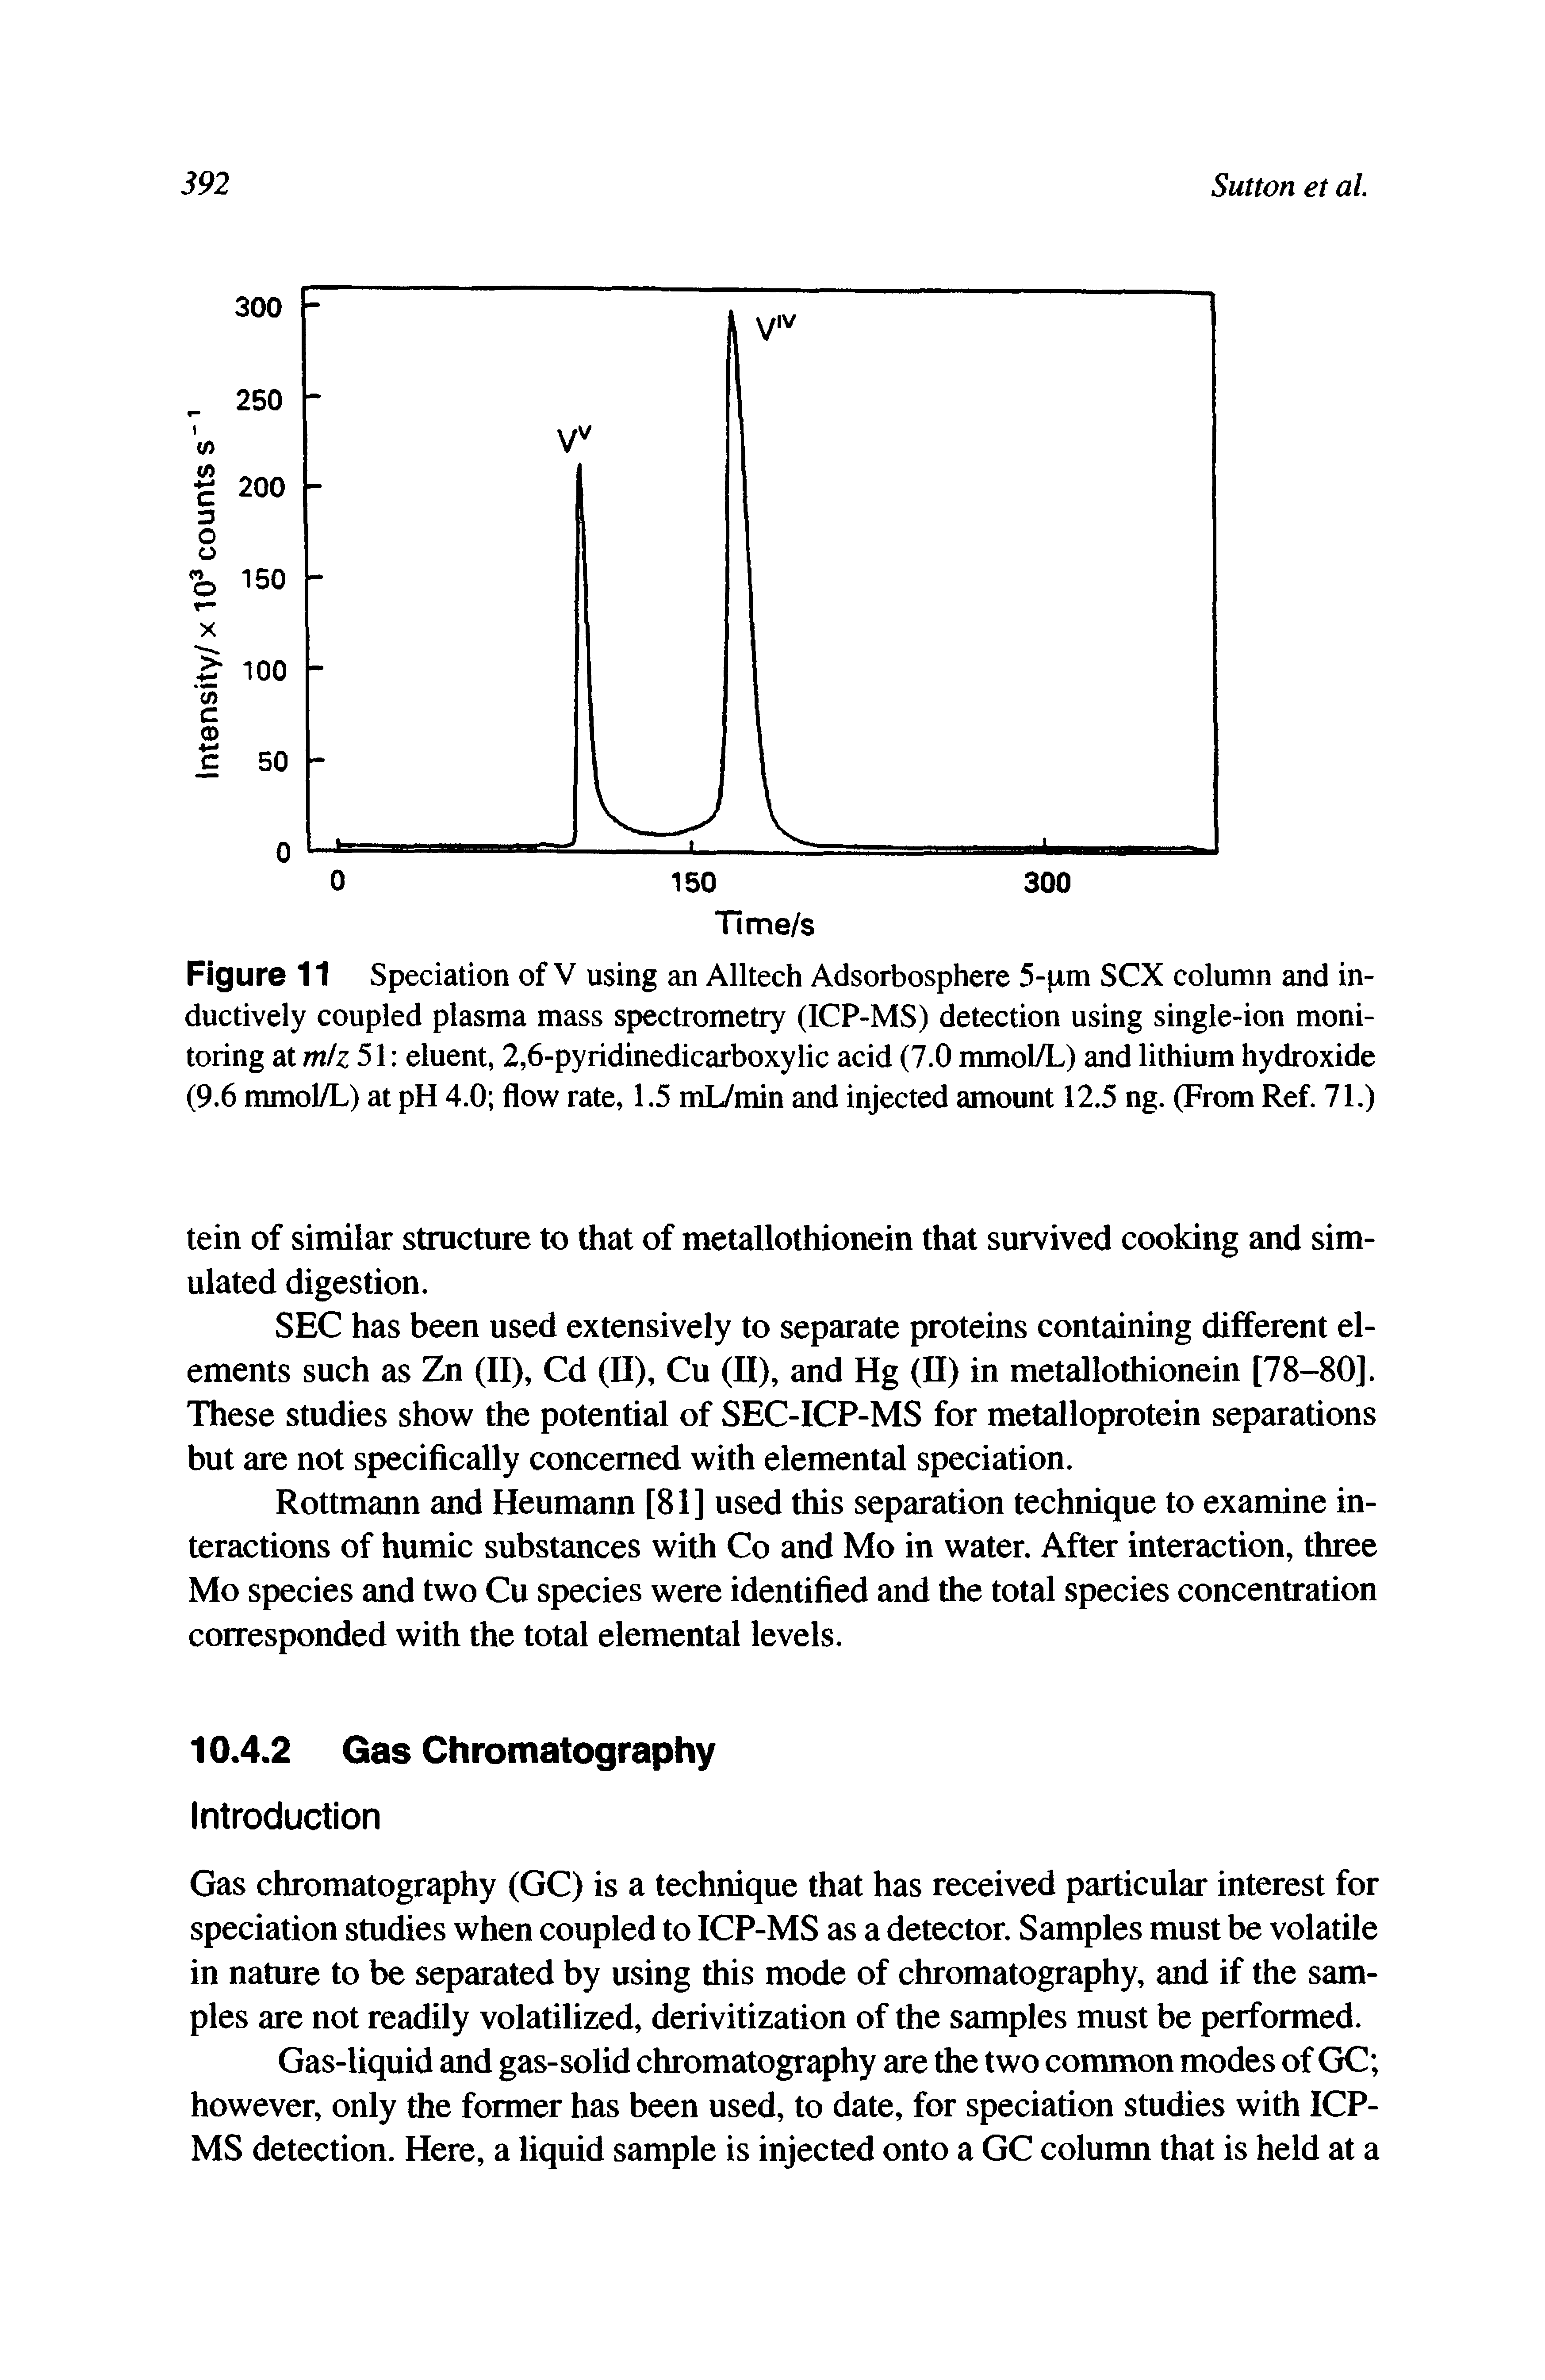 Figure 11 Speciation of V using an Alltech Adsorbosphere 5-pm SCX column and inductively coupled plasma mass spectrometry (ICP-MS) detection using single-ion monitoring at m z 51 eluent, 2,6-pyridinedicarboxylic acid (7.0 mmol/L) and lithium hydroxide (9.6 mmol/L) at pH 4.0 flow rate, 1.5 mL/min and injected amount 12.5 ng. (From Ref. 71.)...